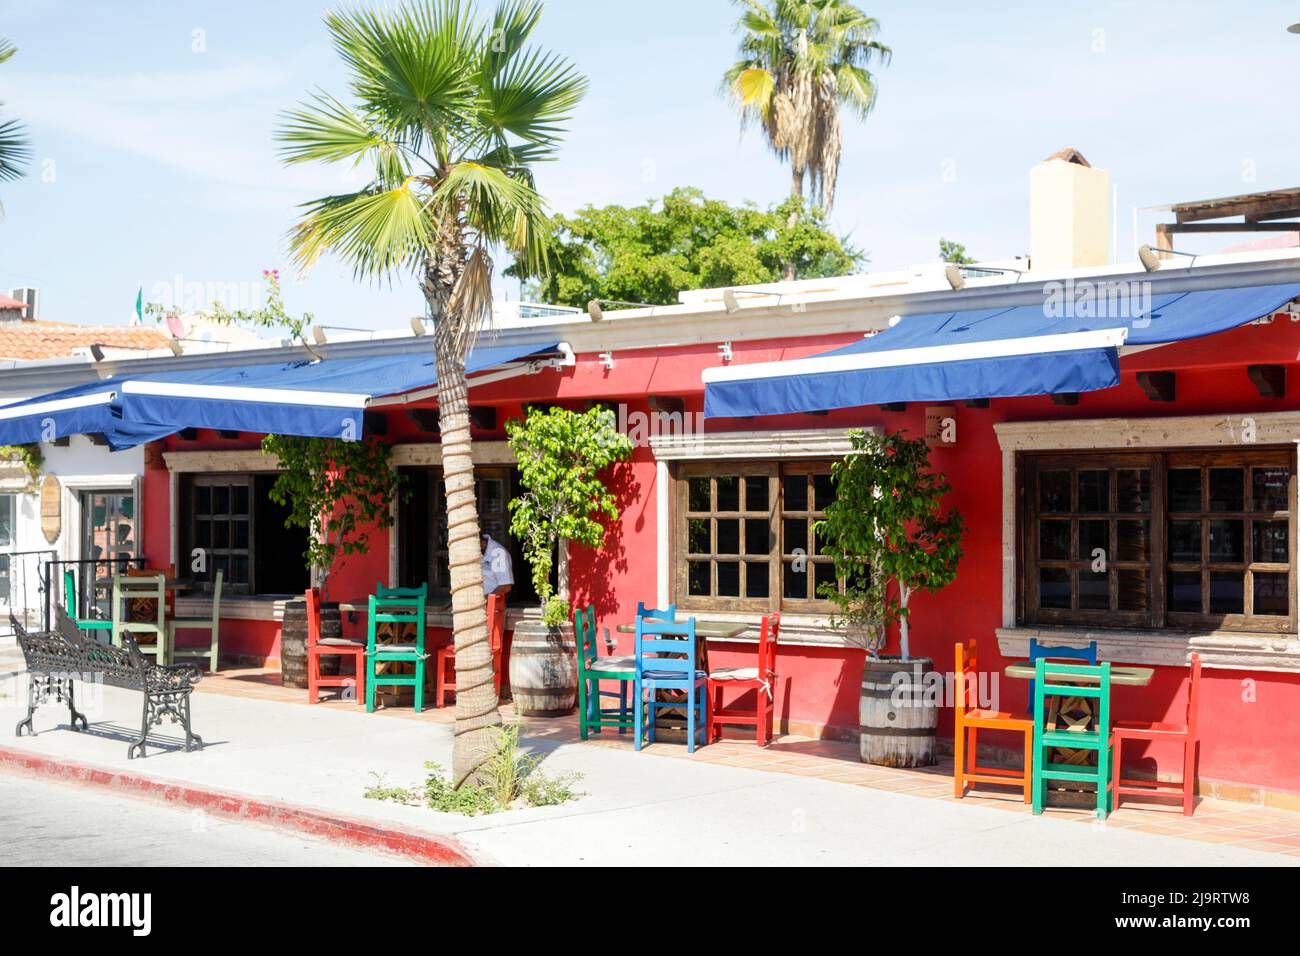 Cabo San Lucas, Mexico. Colorful front of a cafe. Stock Photo